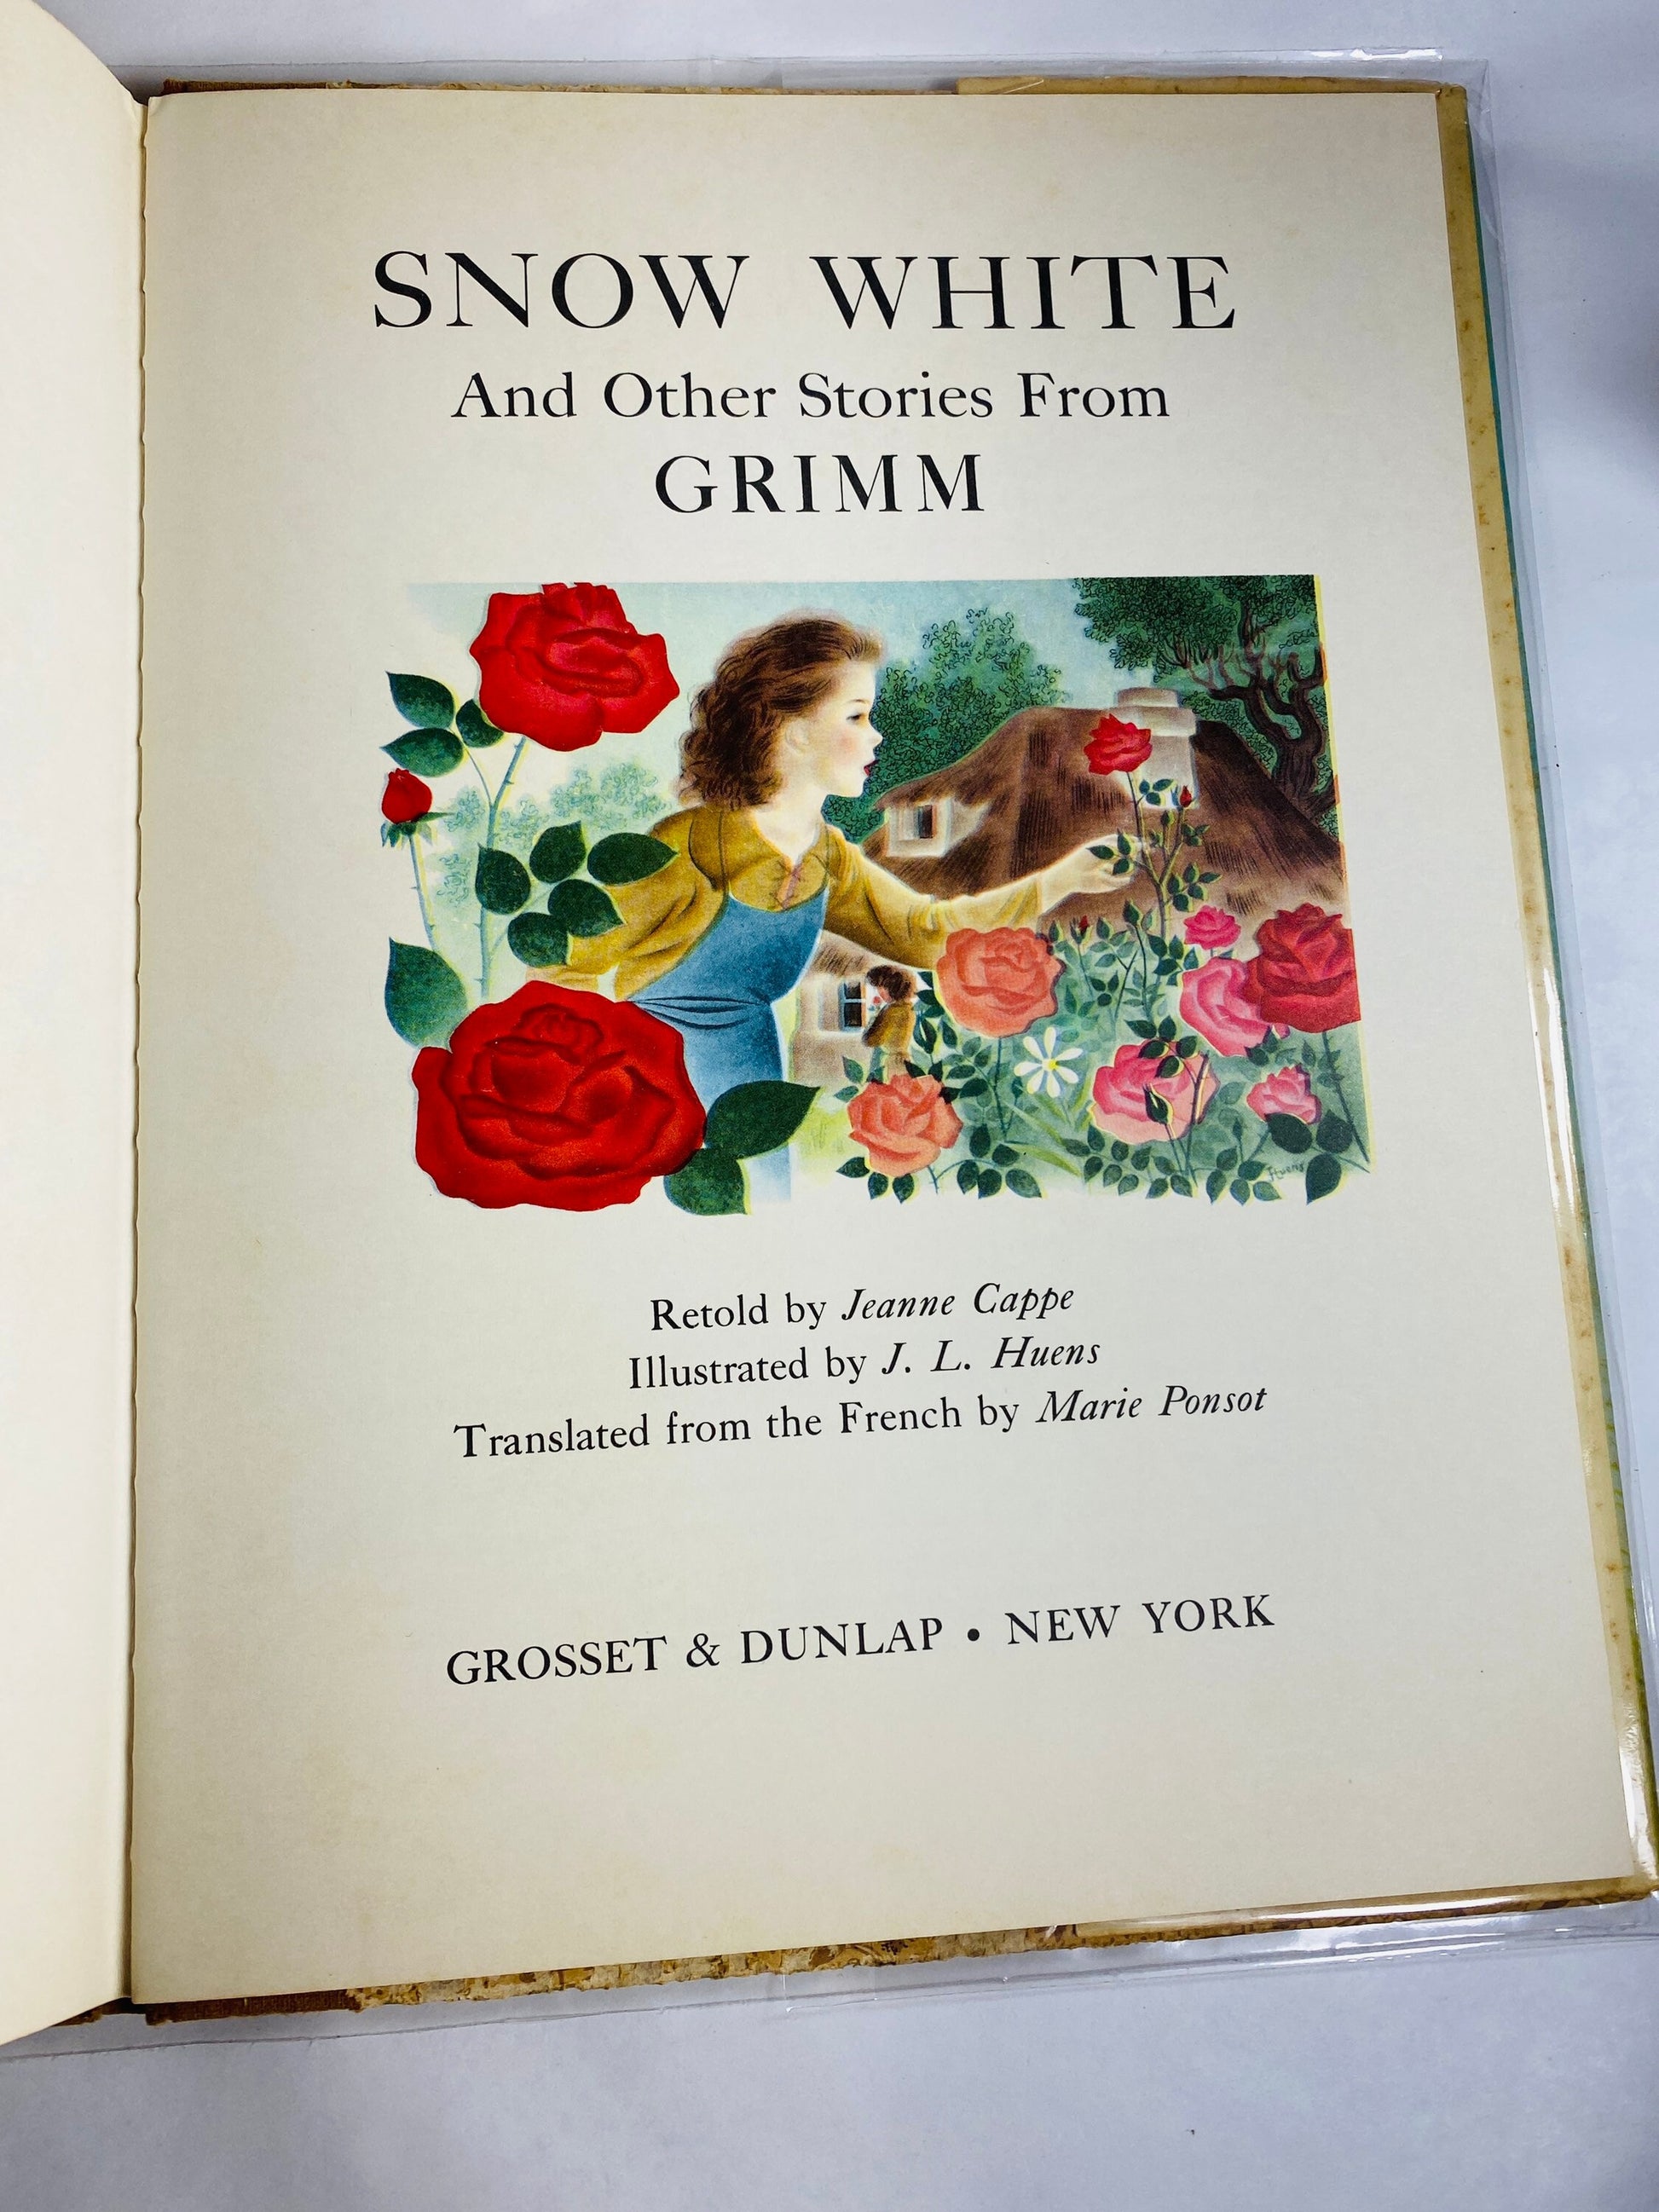 Snow White OVERSIZED vintage children’s book circa 1957 with dust jacket EARLY PRINTING Cappe Collectible princess nursery decor